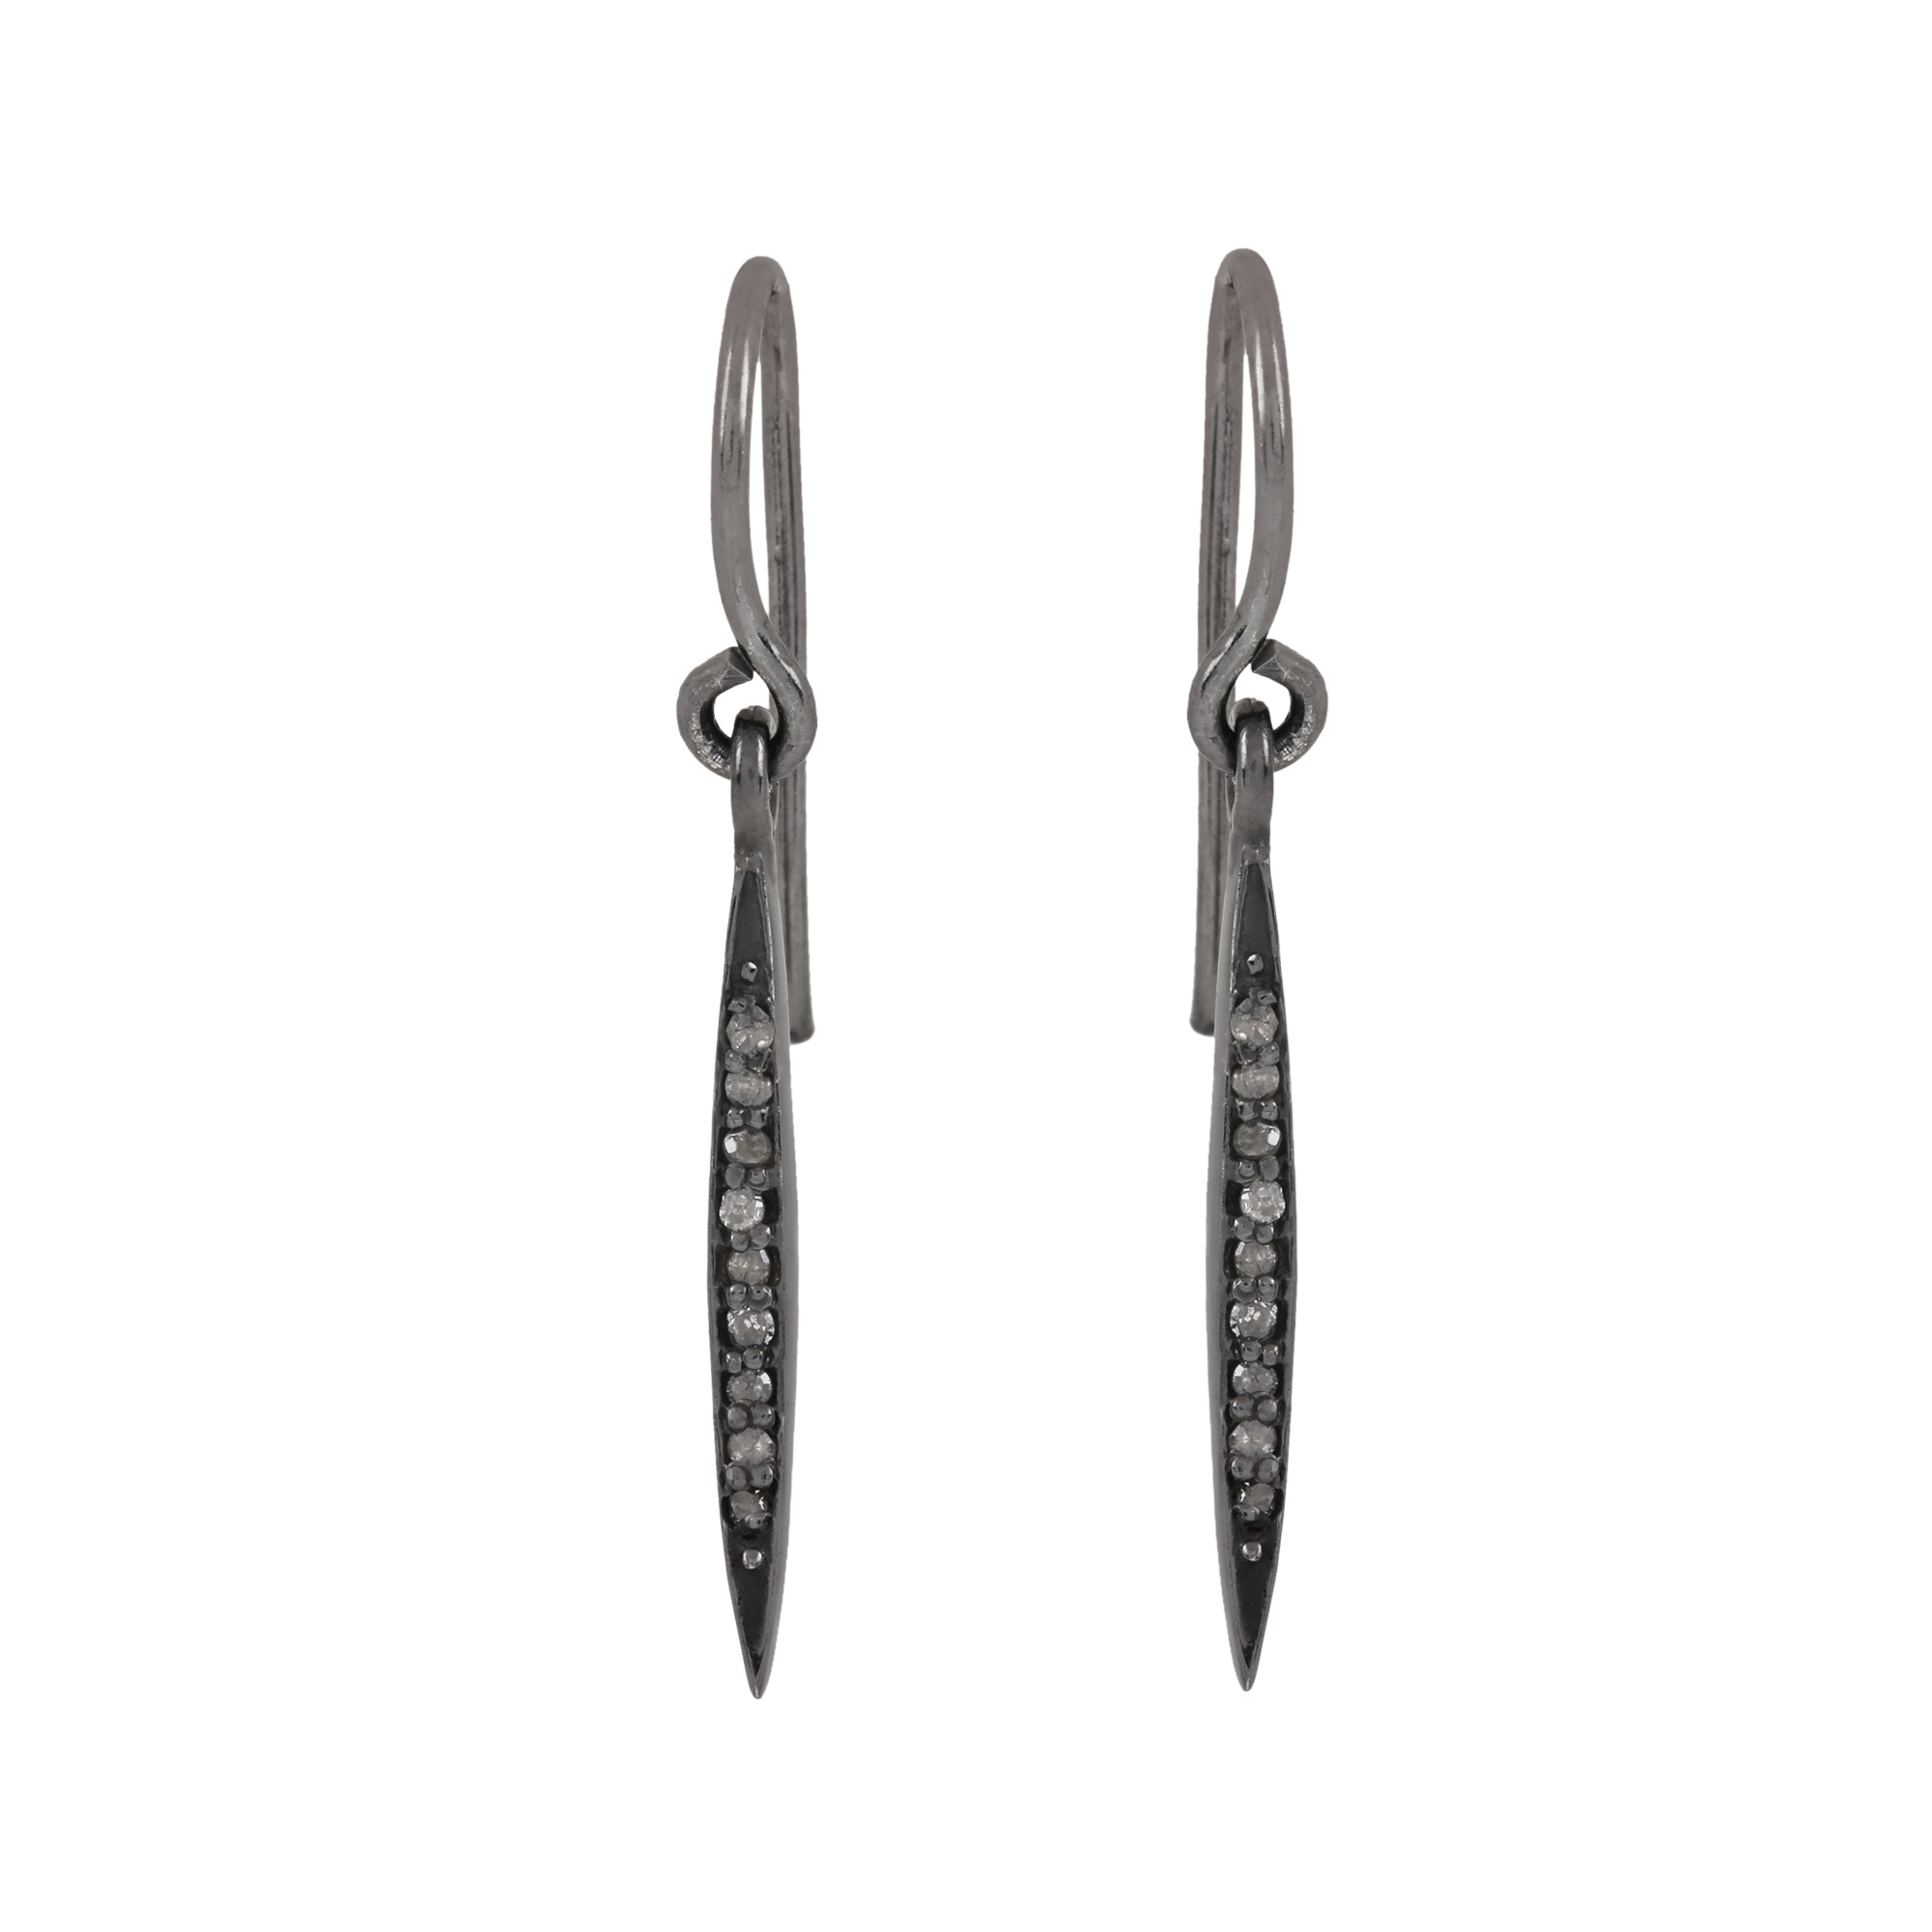 Hook earrings adorned with natural diamond 925 sterling silver jewelry